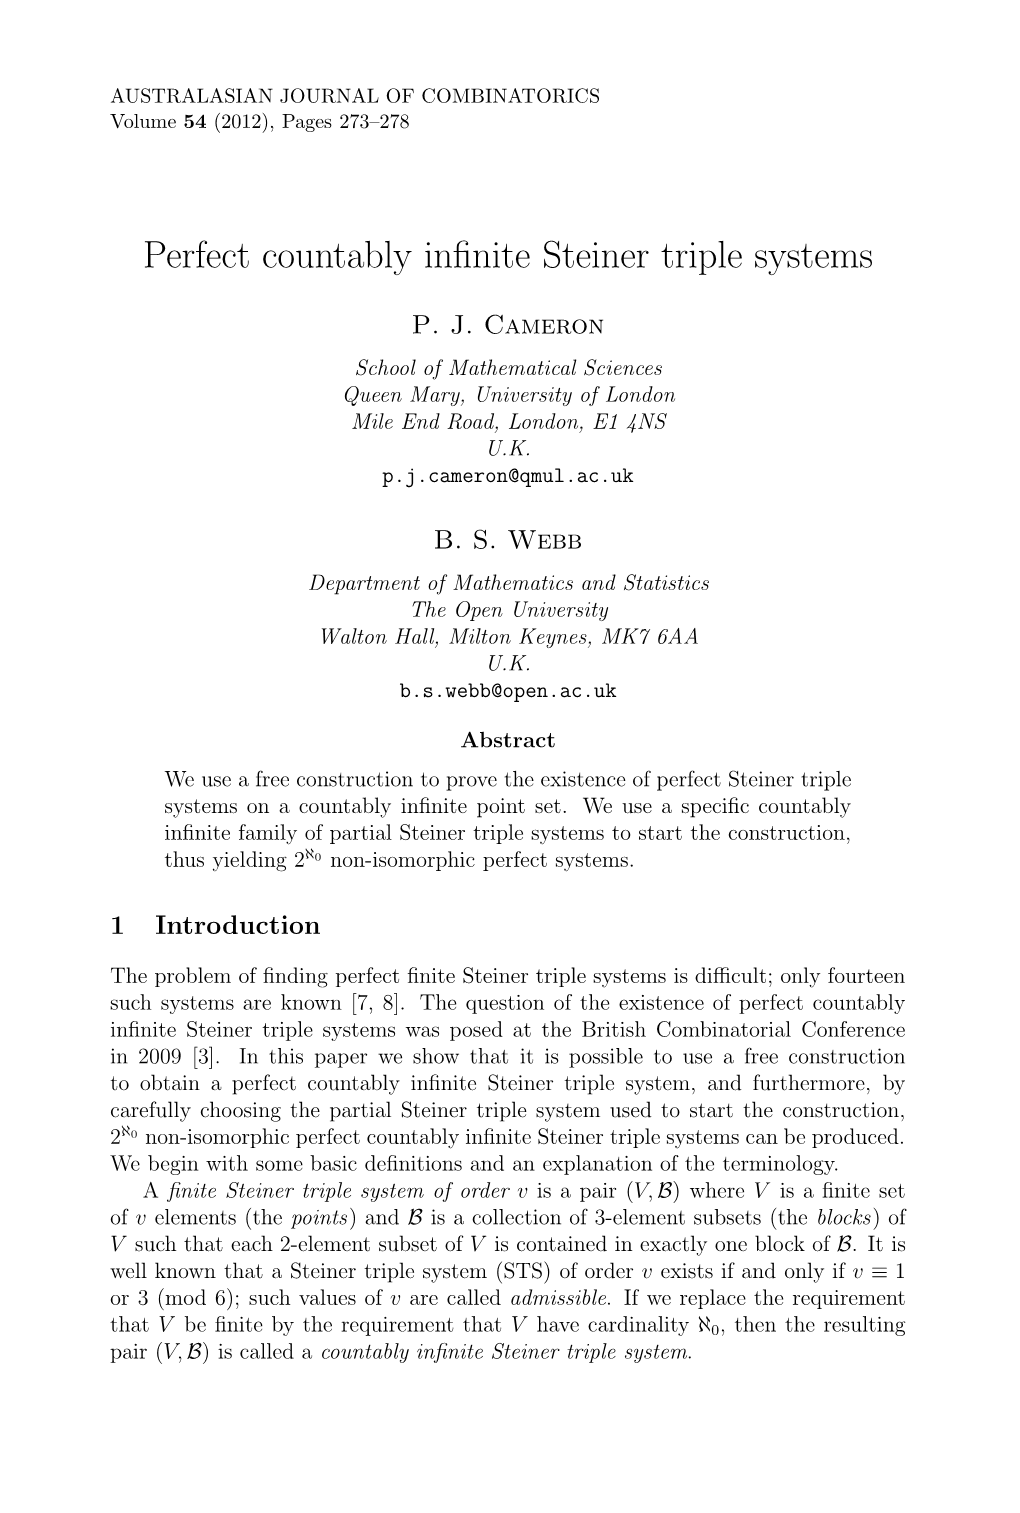 Perfect Countably Infinite Steiner Triple Systems